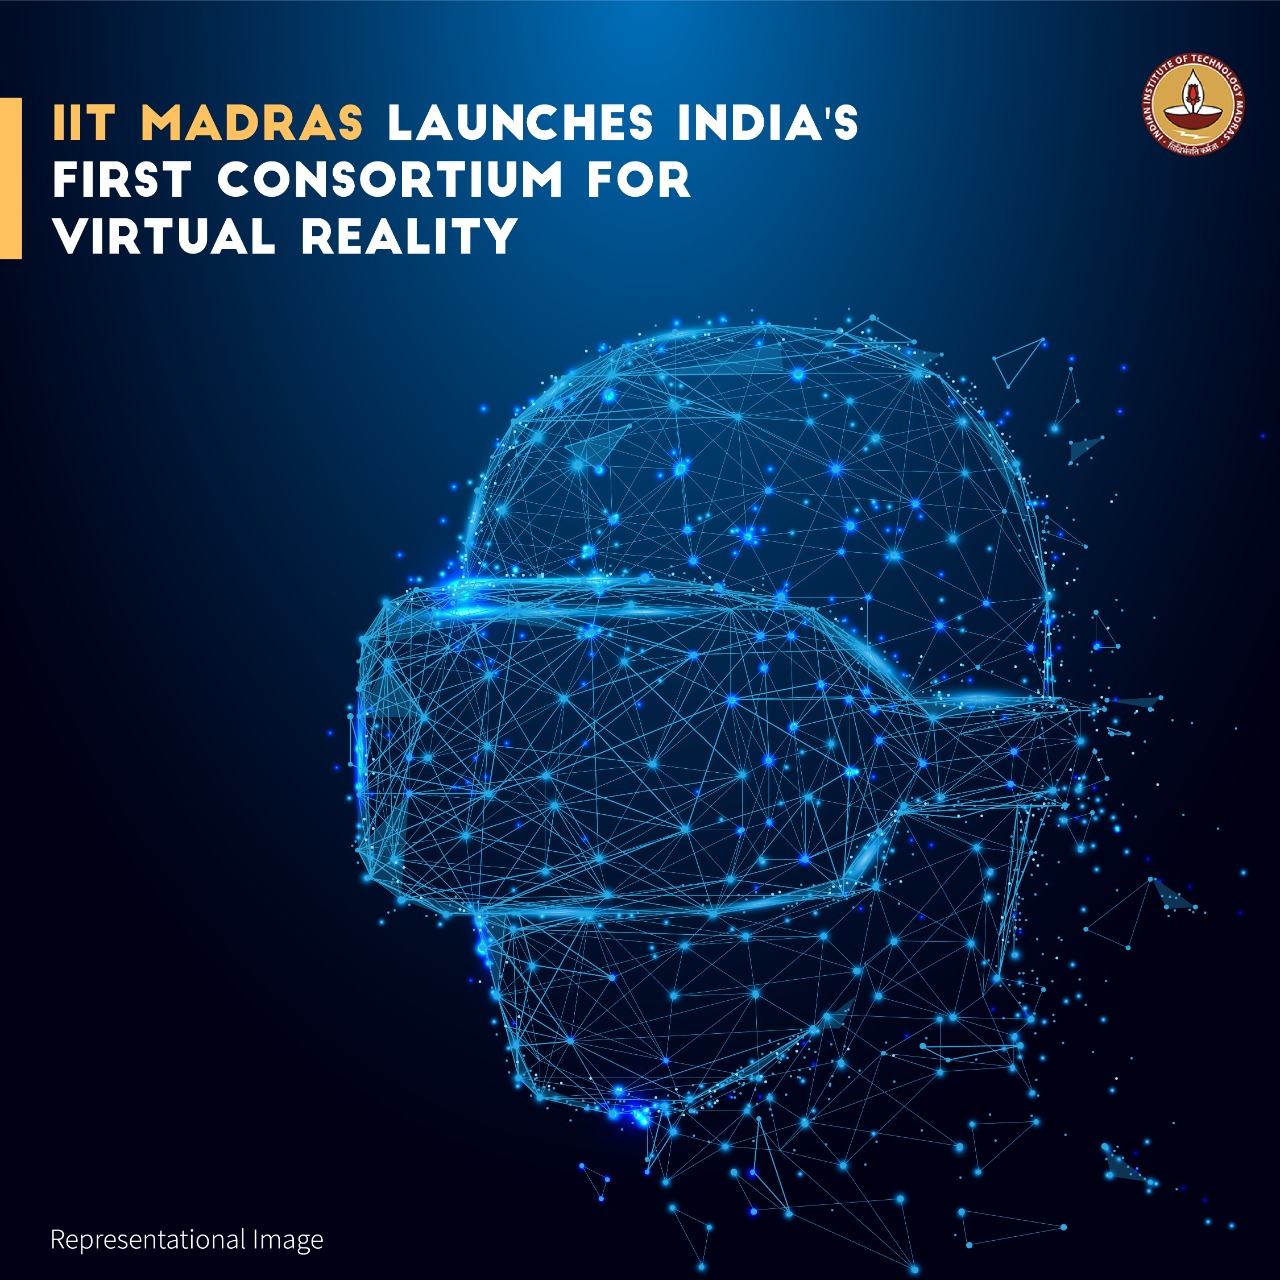 IIT Madras launches India’s First Consortium for Virtual Reality